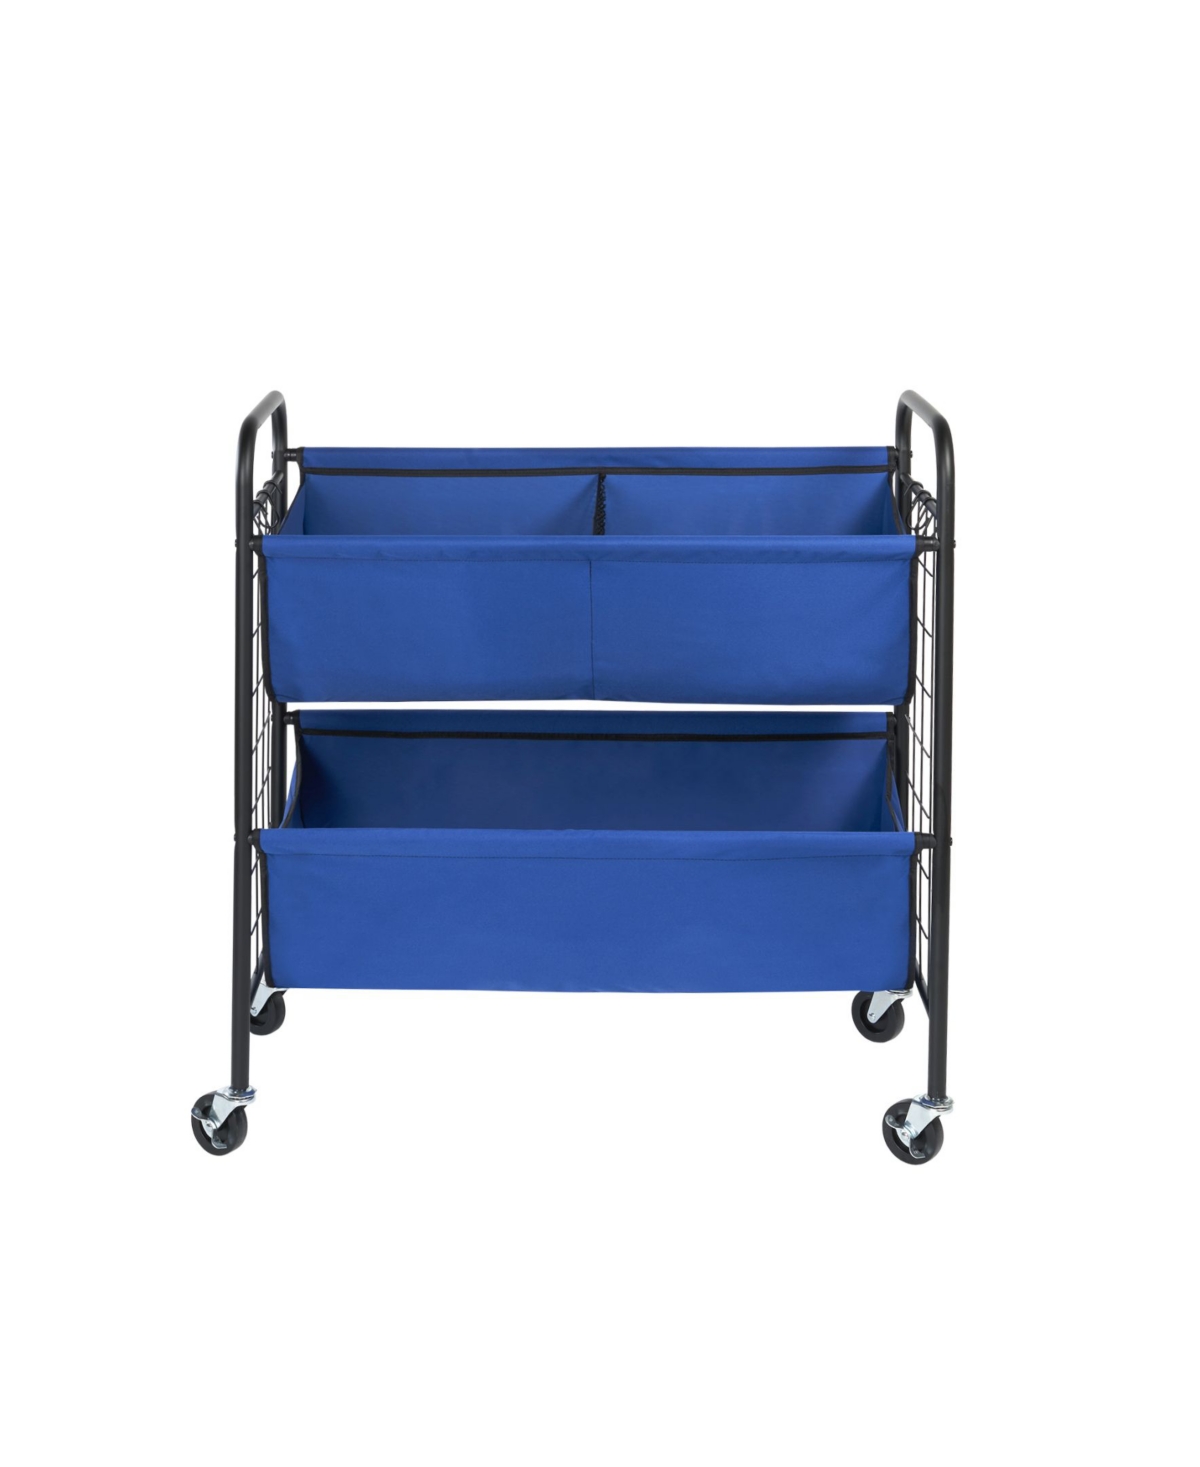 2 Tier Garage Organizer with Casters - Classic Blue